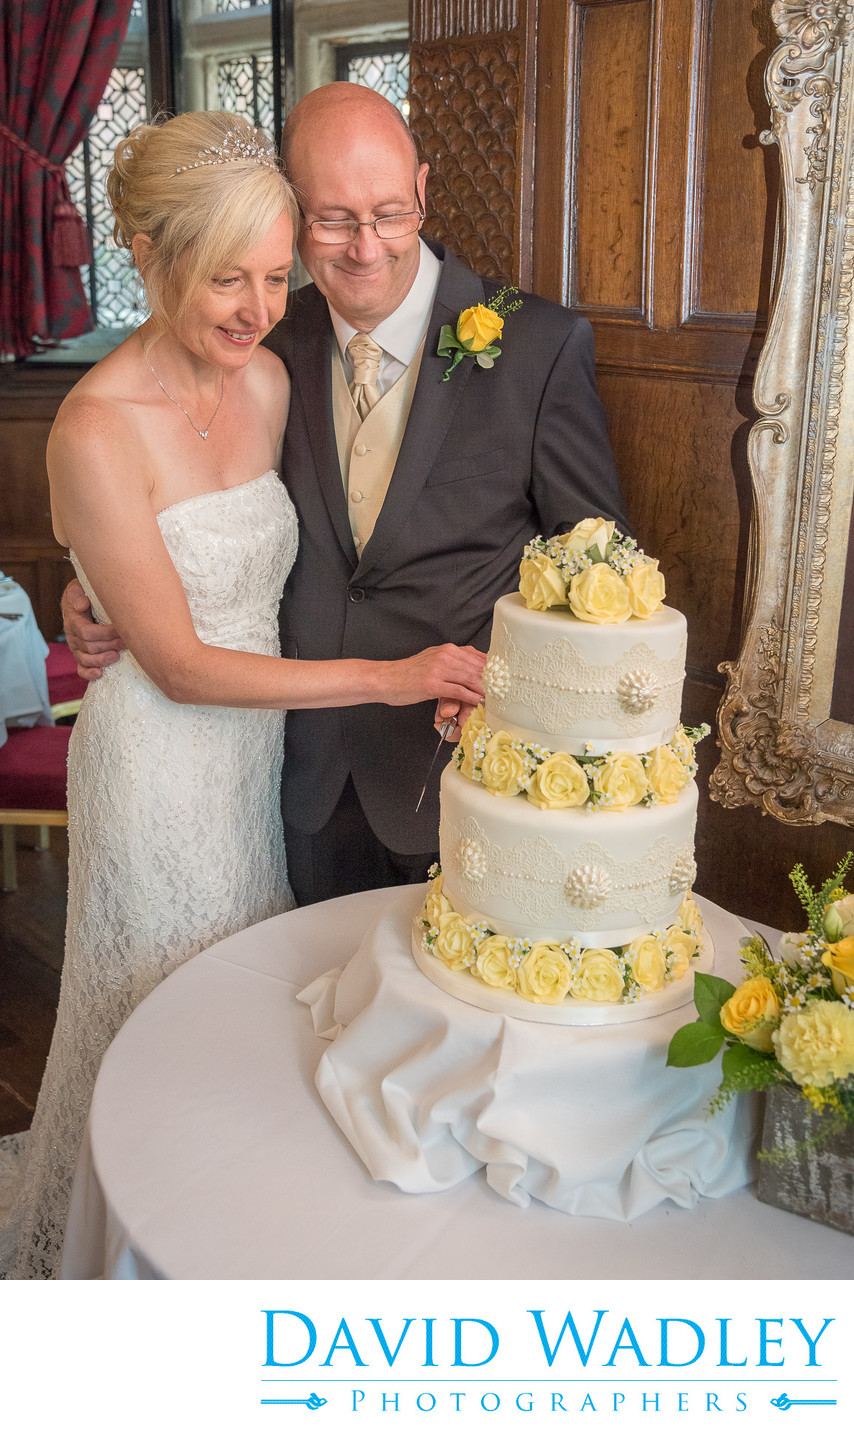 Wedding cake at New Hall Hotel in Sutton Coldfield.